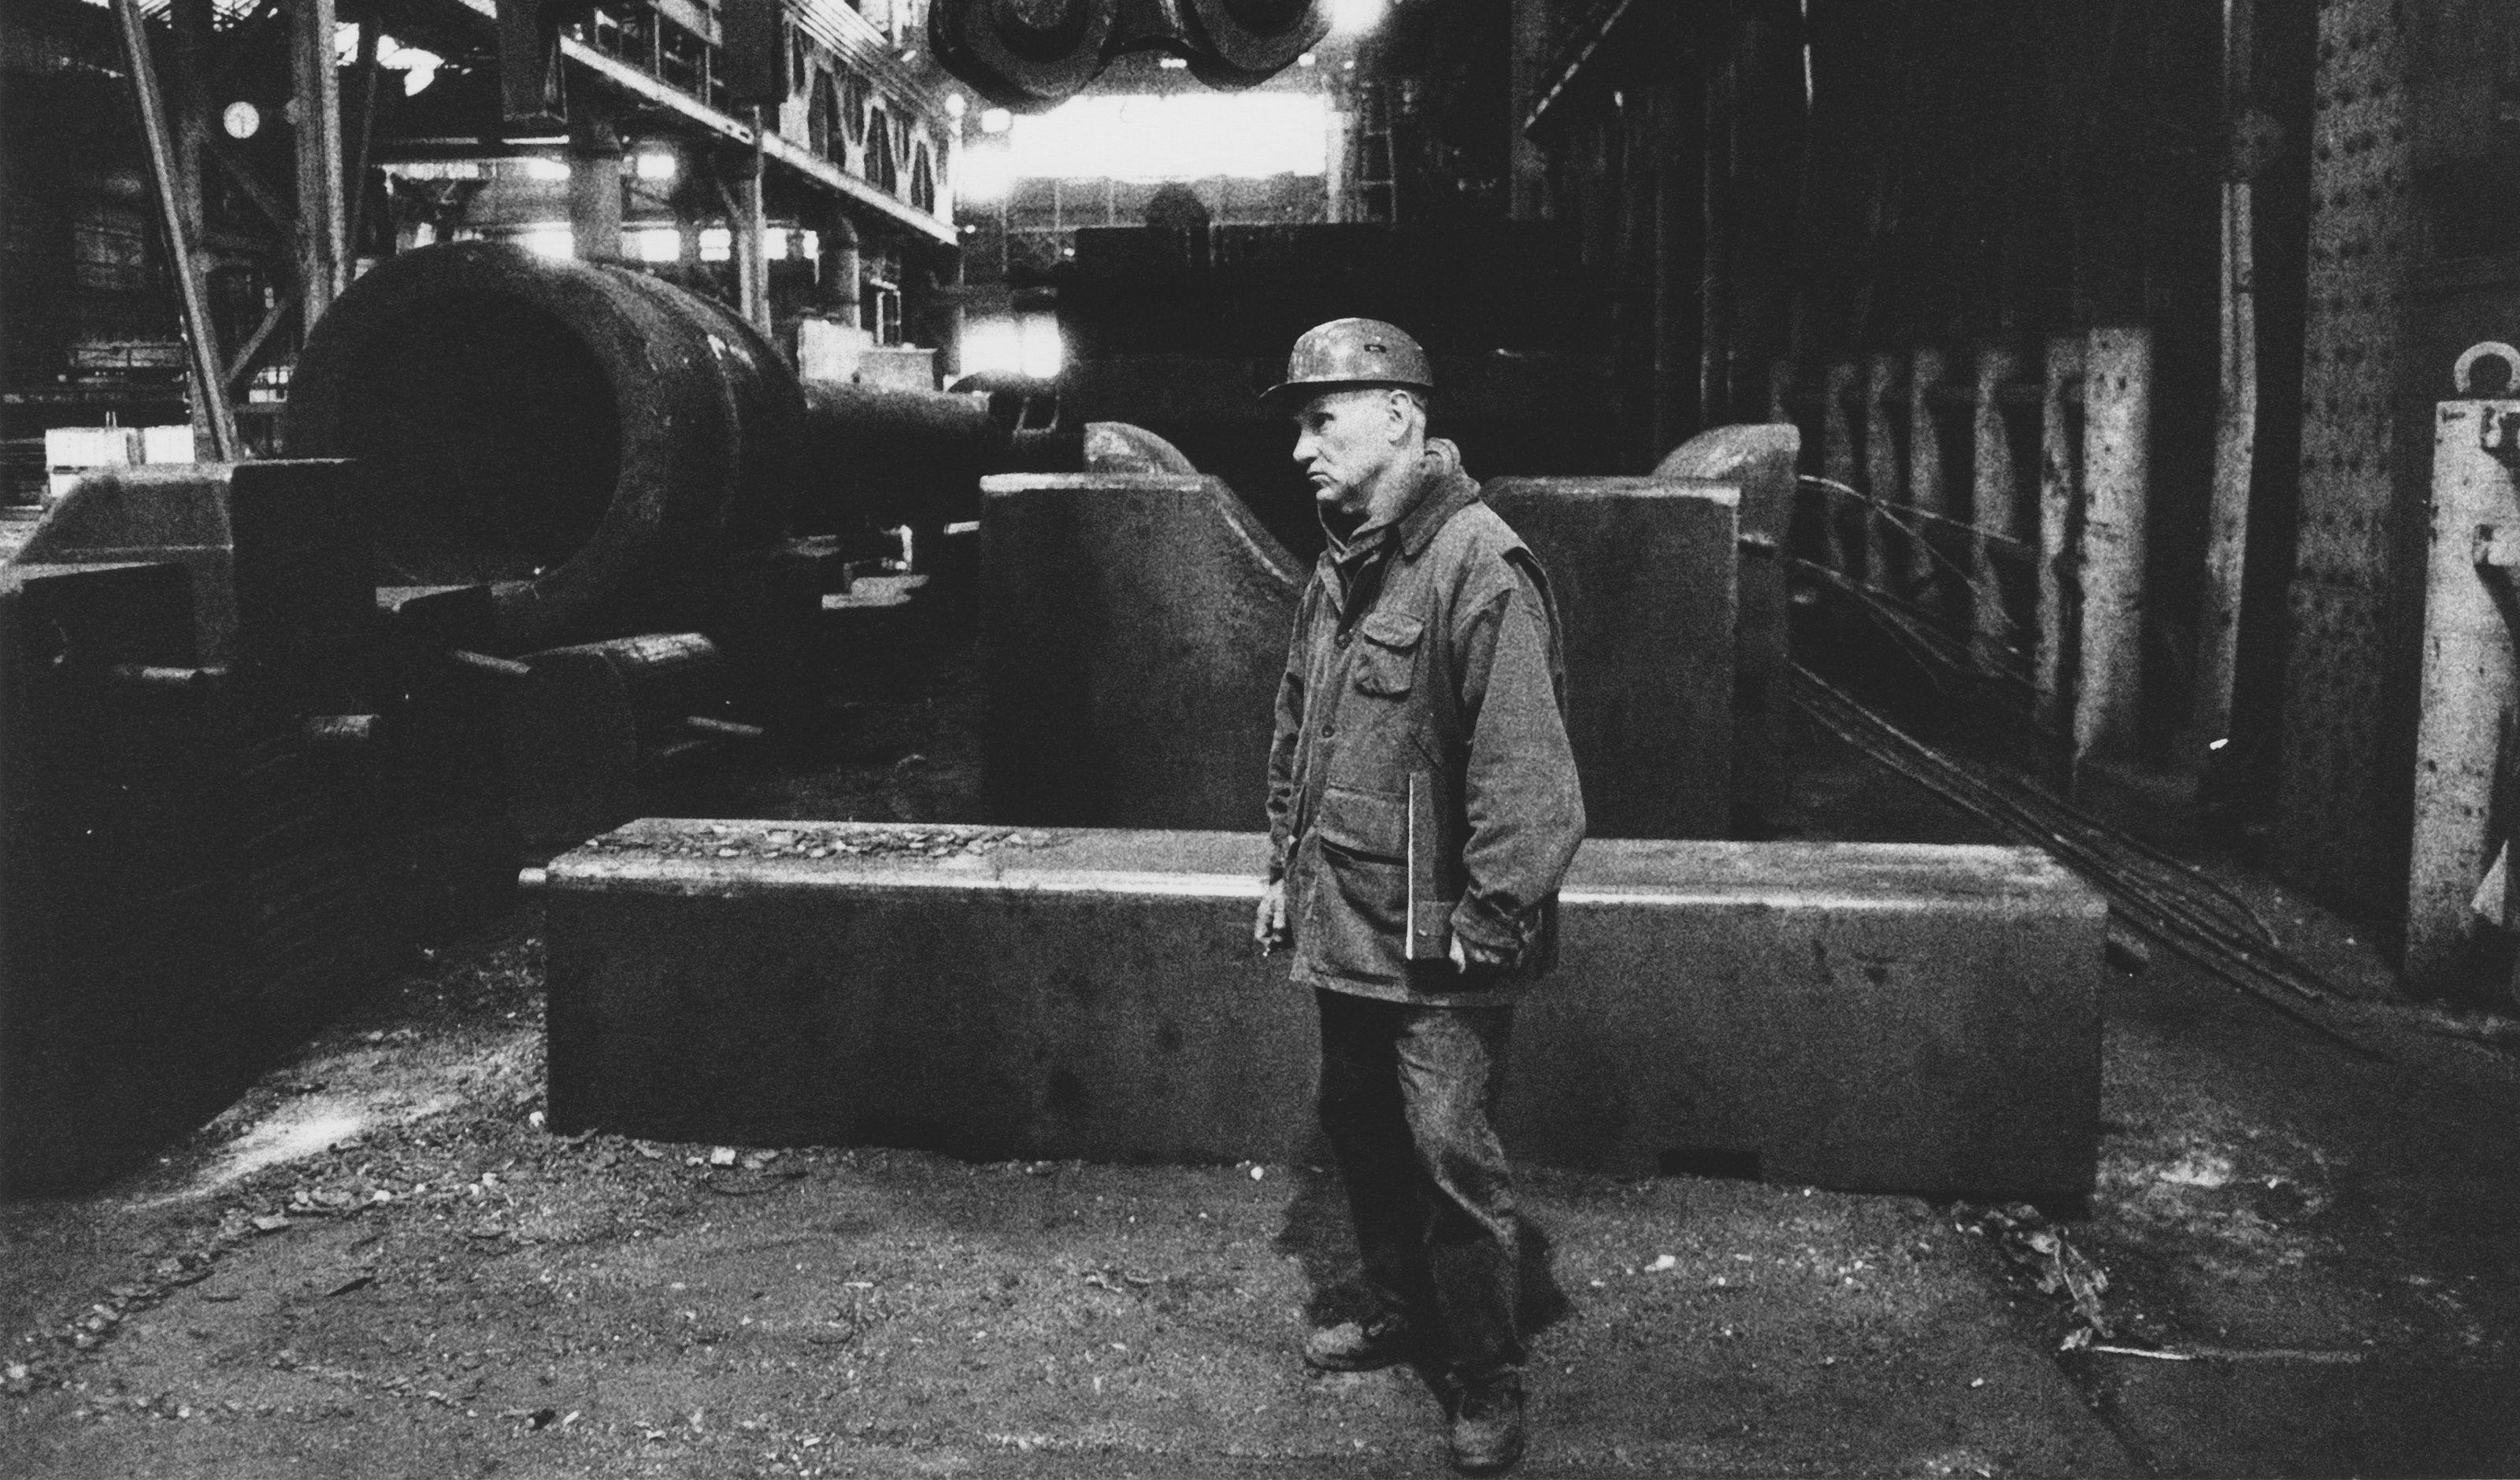 Richard Serra in 1992 at the Henrichshütte Hattingen Foundry in Germany, overseeing the forging of his sculpture titled Weight and Measure.